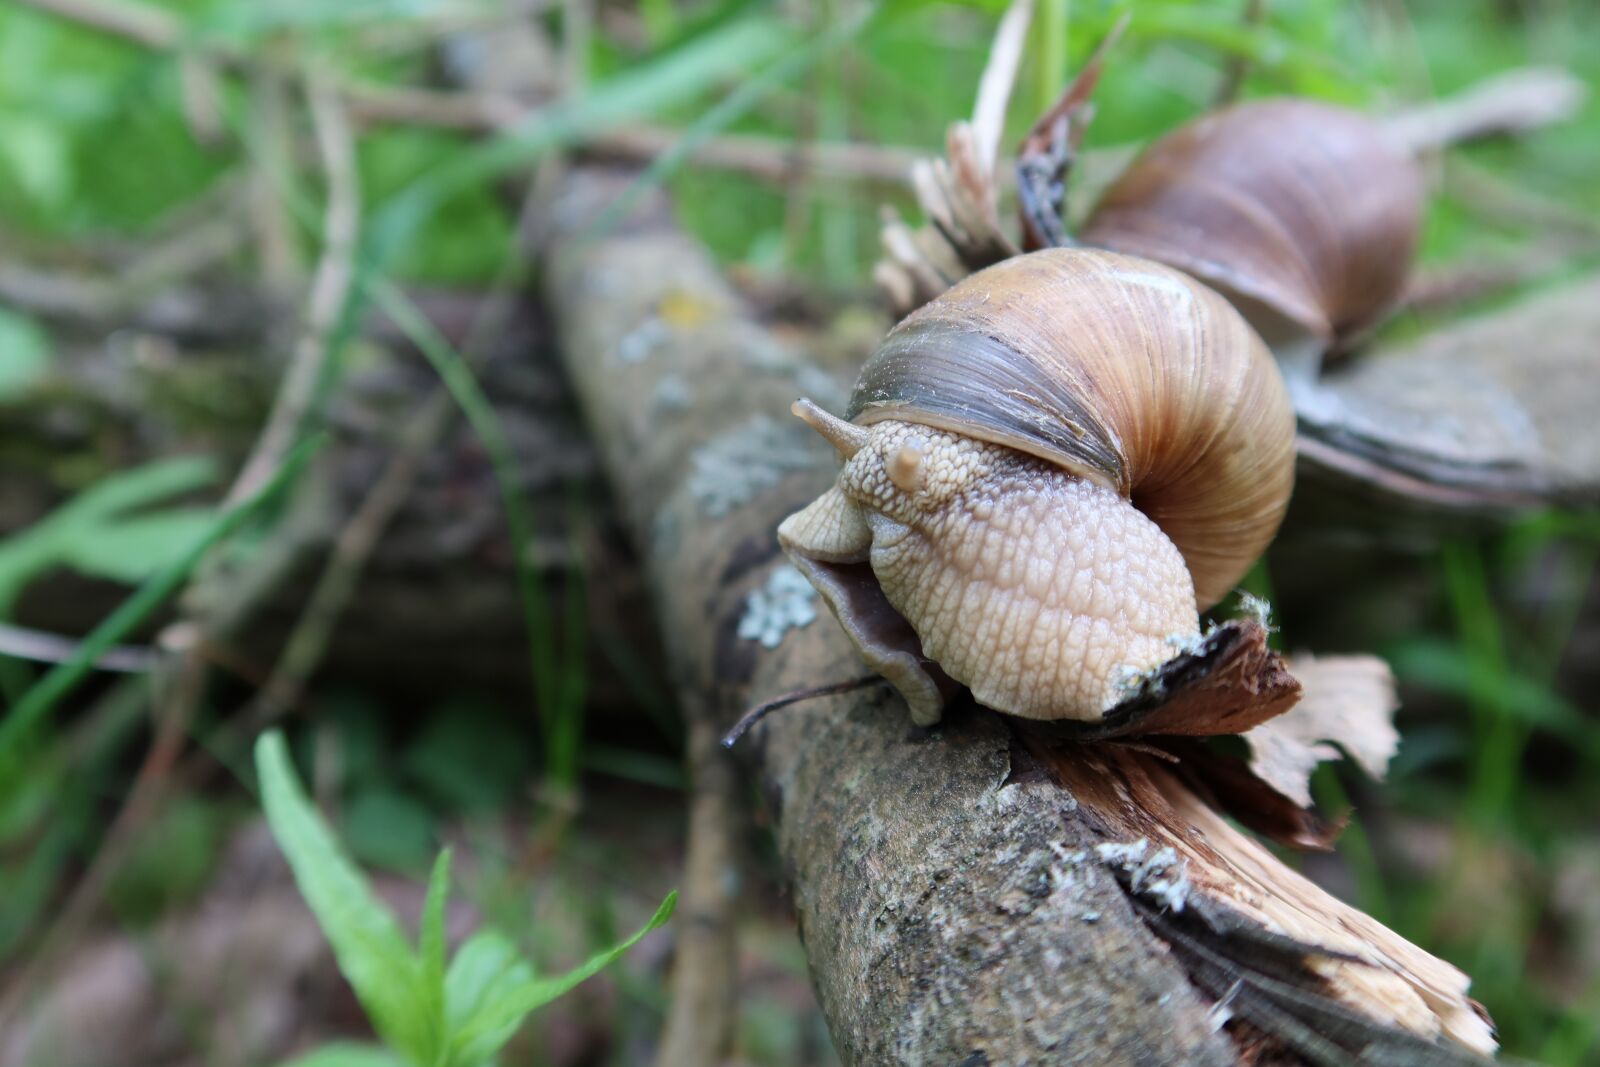 Canon PowerShot G7 X Mark III sample photo. Snail, forest, nature photography